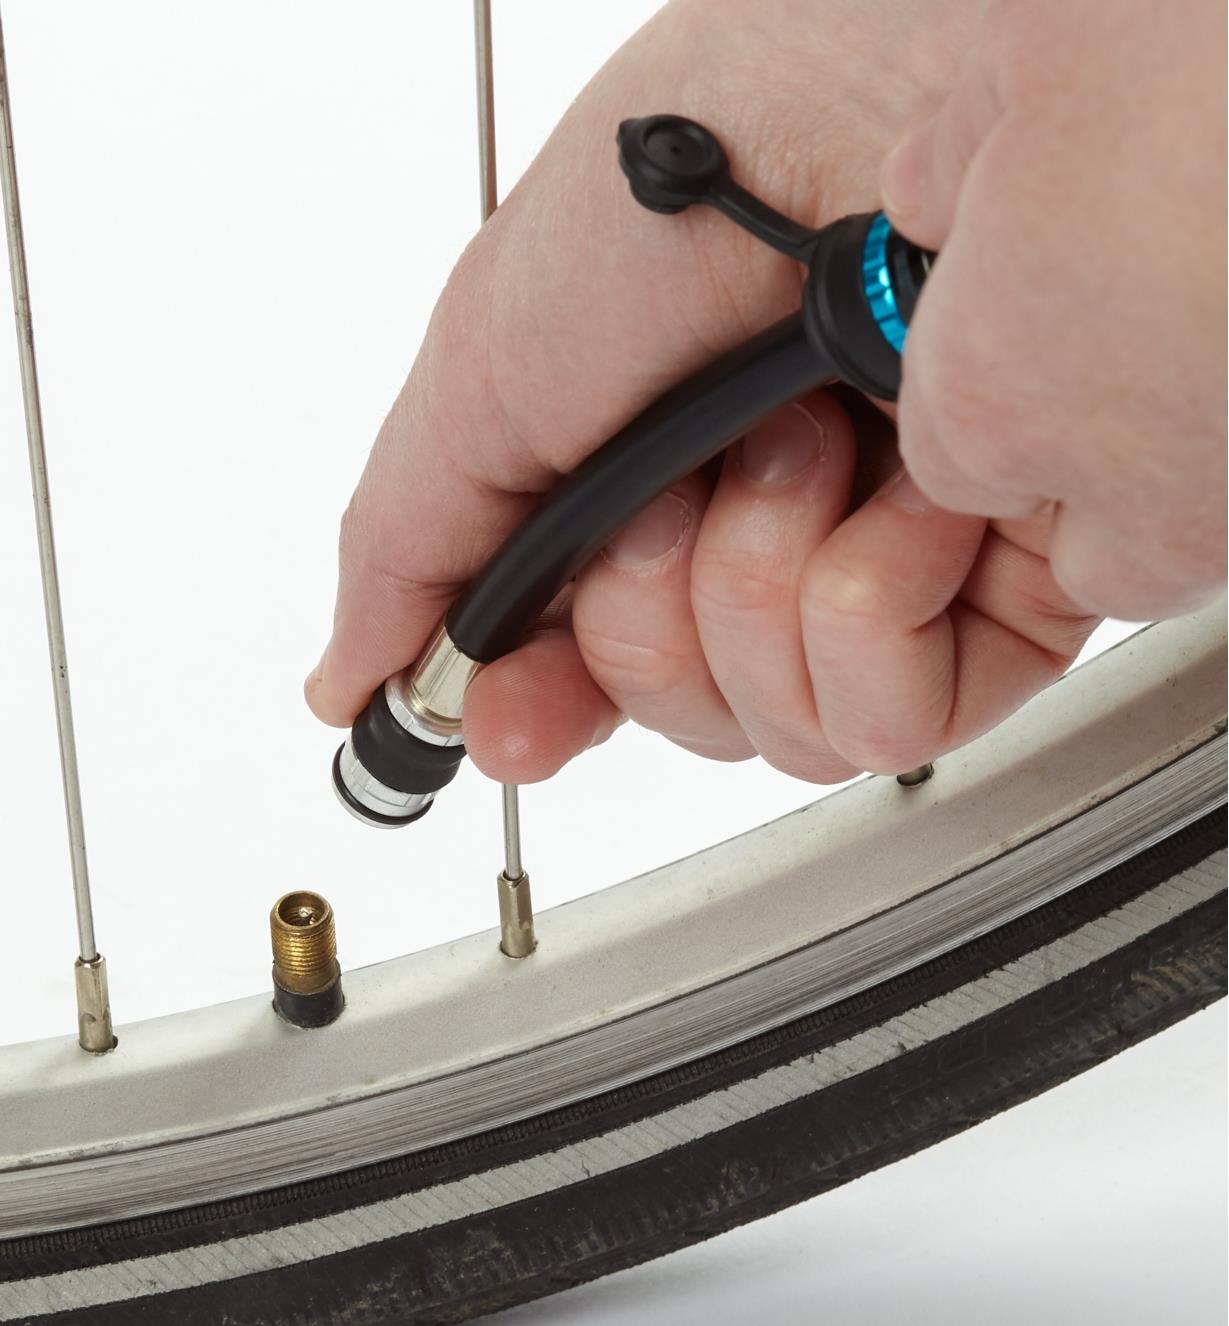 Attaching the hose fitting to a bicycle tire valve